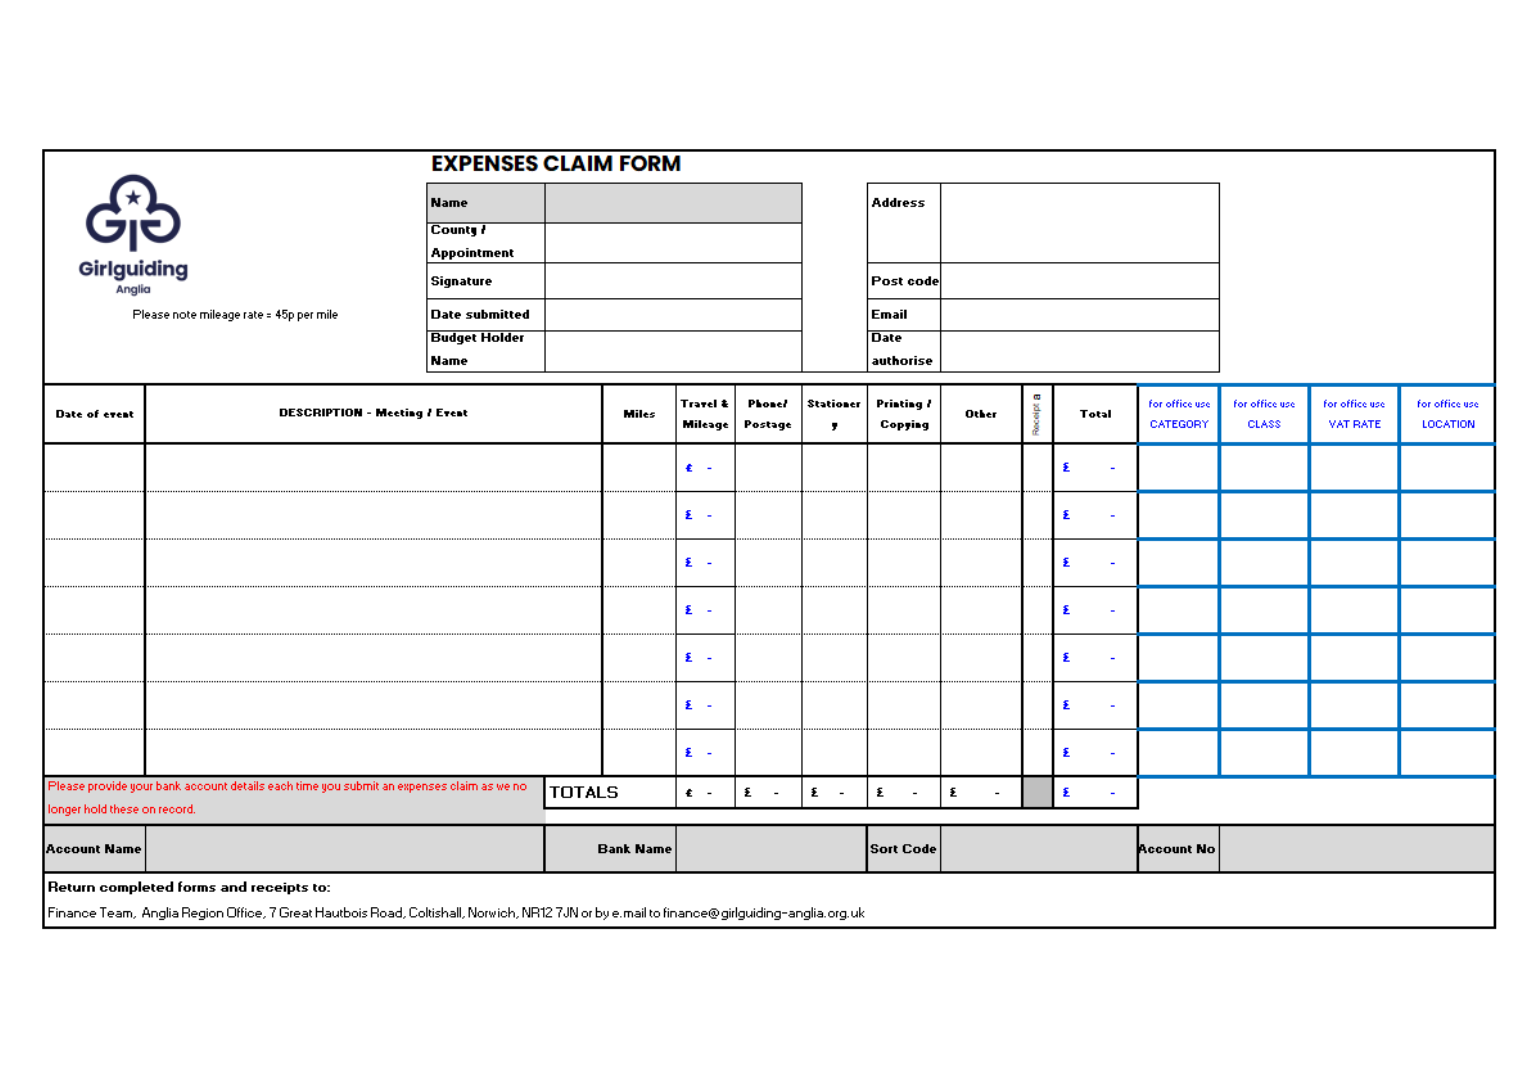 image relating to Expenses claim form